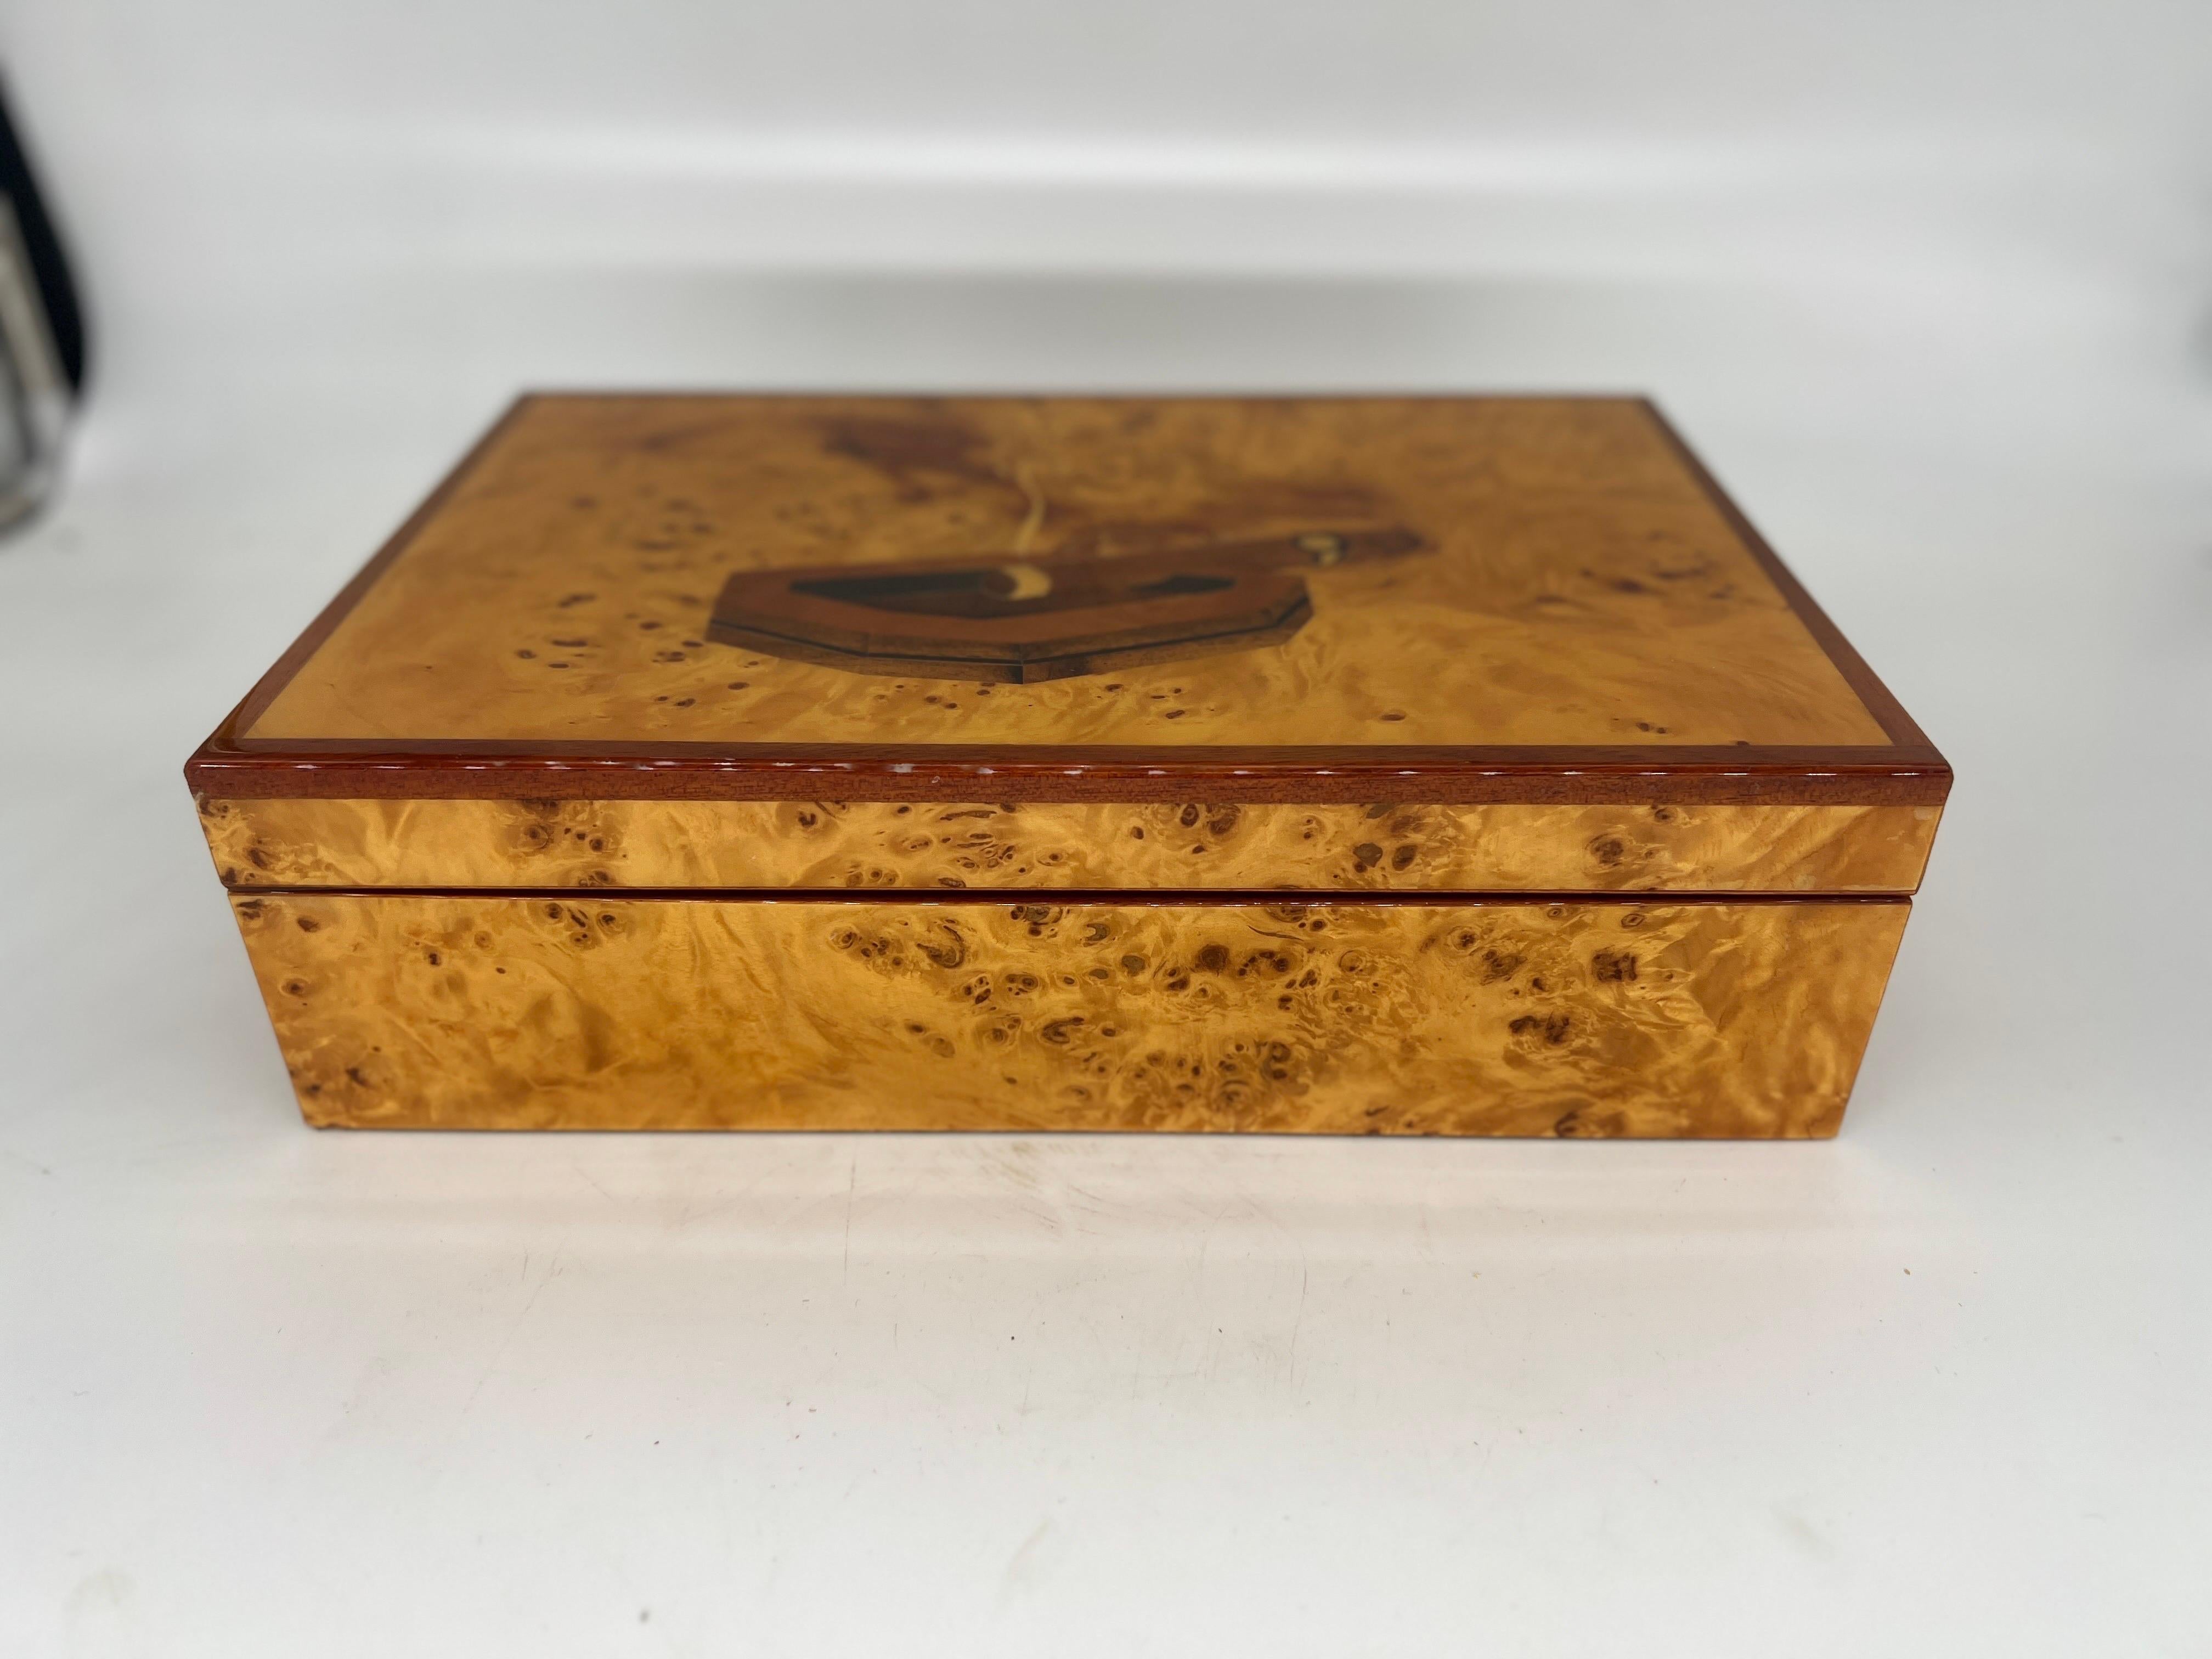 This vintage Diamond Crown inlaid burl-wood humidor is the perfect addition to any cigar lover's collection. With its intricate design and high-quality craftsmanship, it is sure to impress. The humidor is designed to keep your cigars fresh and in